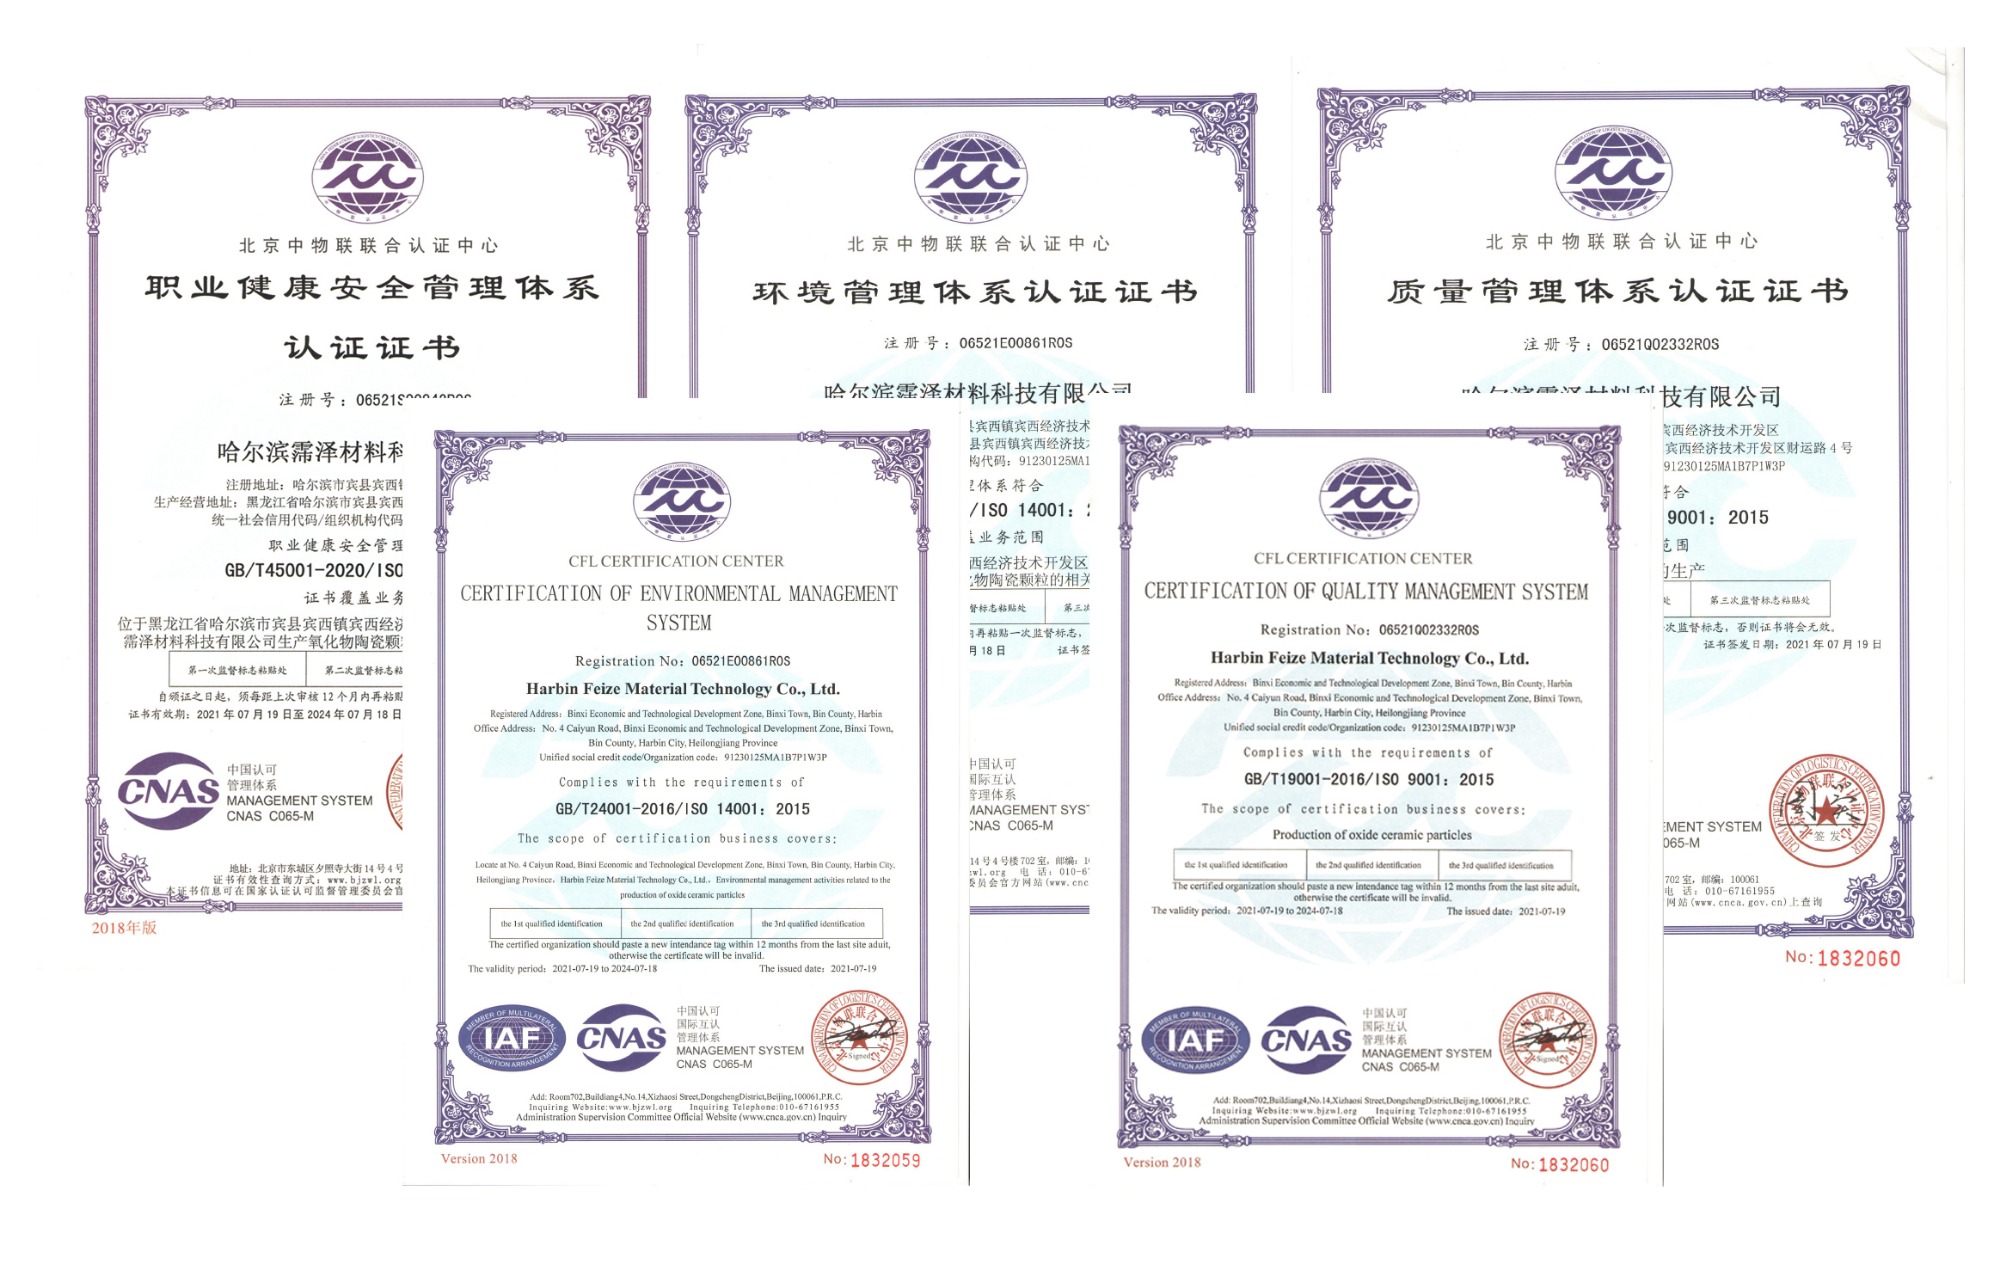 Warmly celebrate the passing of Harbin Peize Material Technology Co., Ltd. [All IOS System Certification]